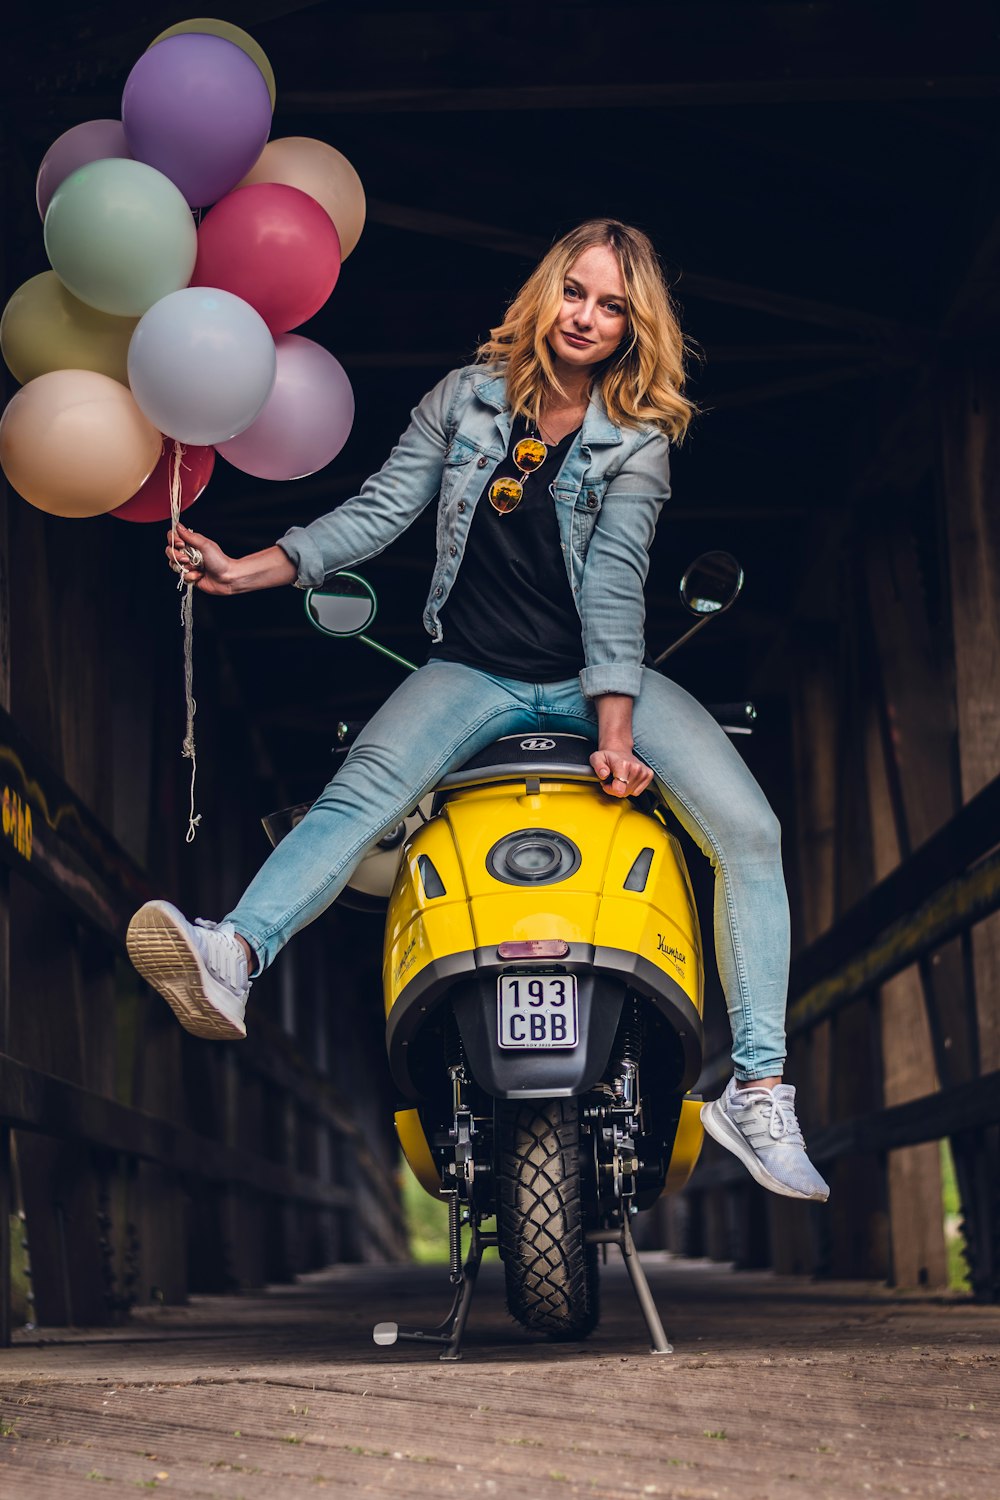 woman in black leather jacket and blue denim jeans riding yellow motorcycle  holding balloons photo – Free Balloon Image on Unsplash